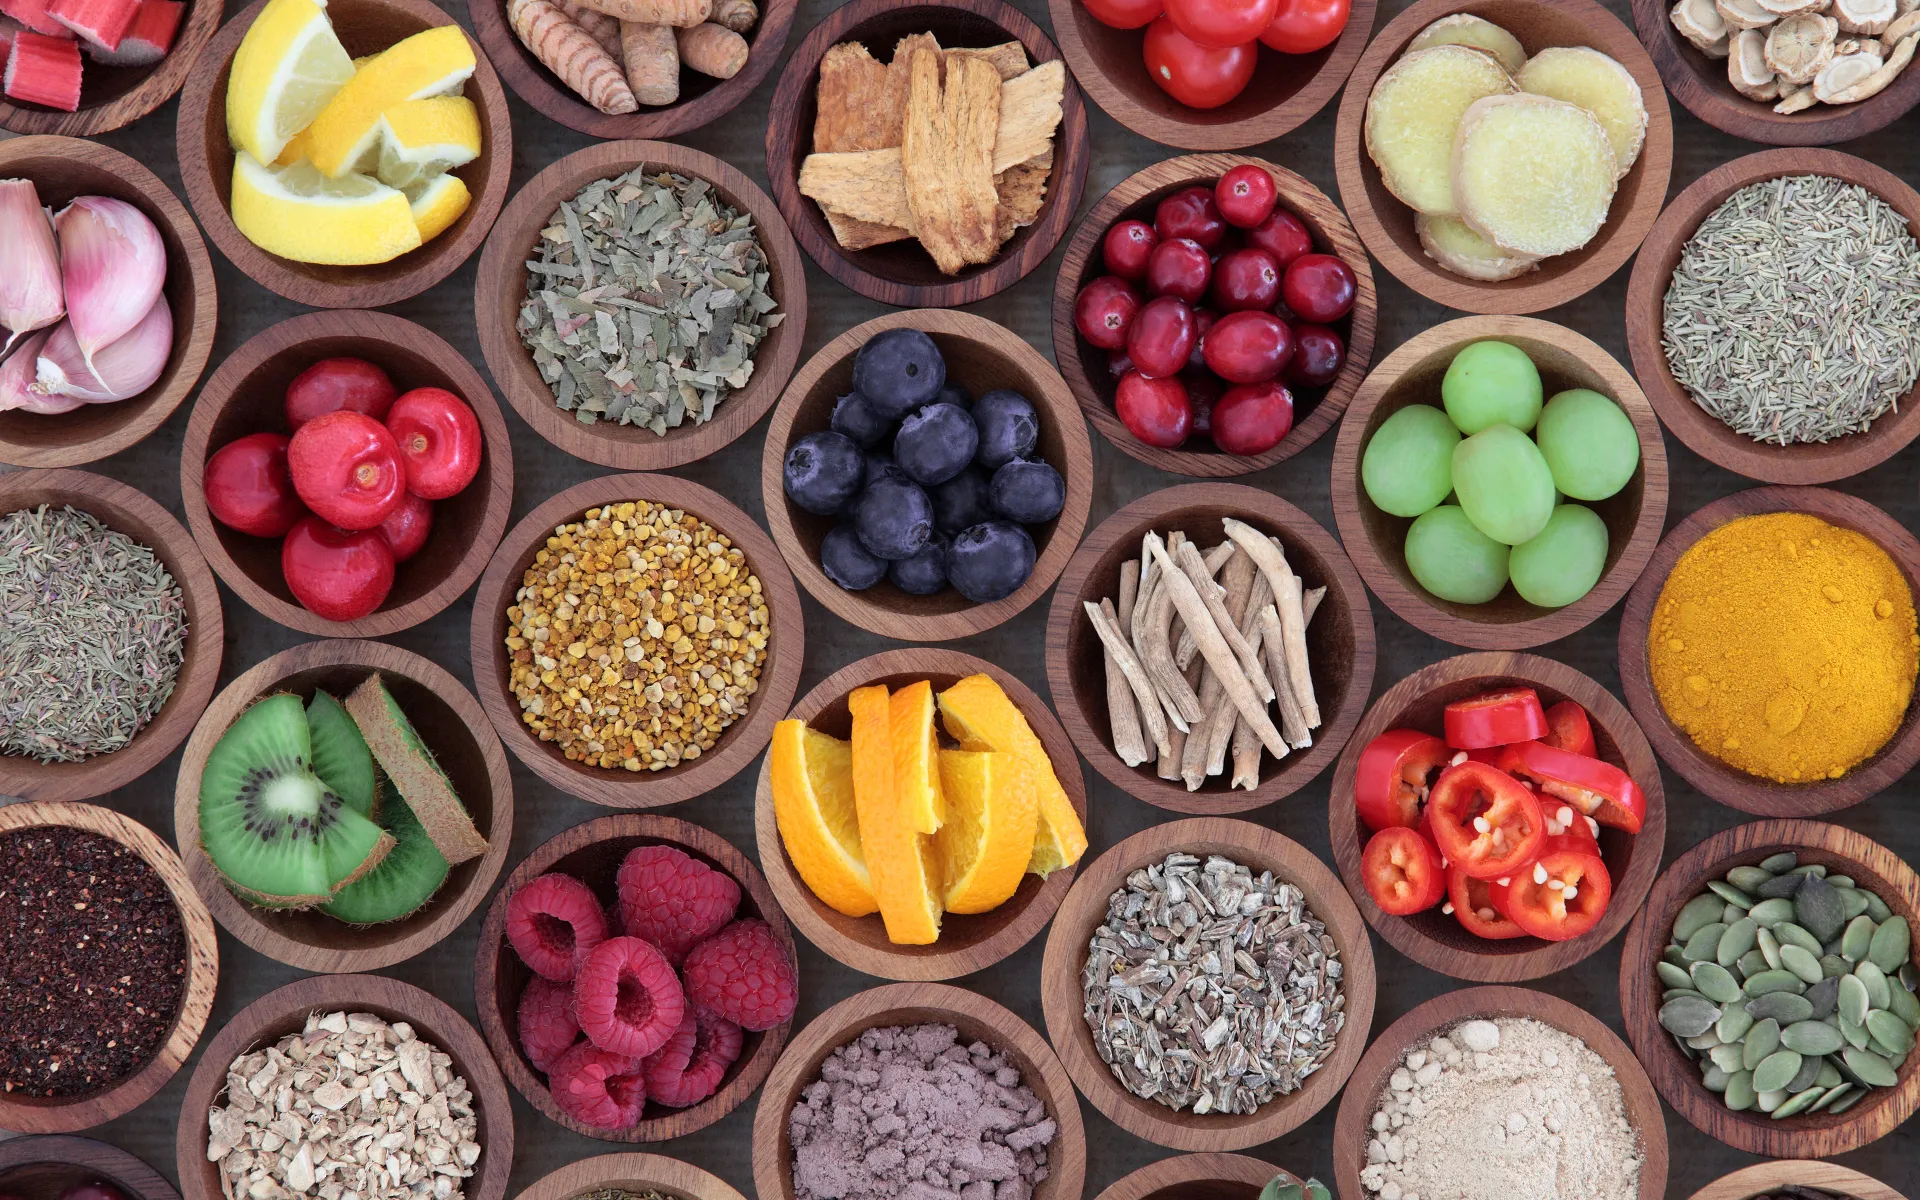 15 Things You Didn’t Know About Antioxidants – Including Their Anti Aging Abilities